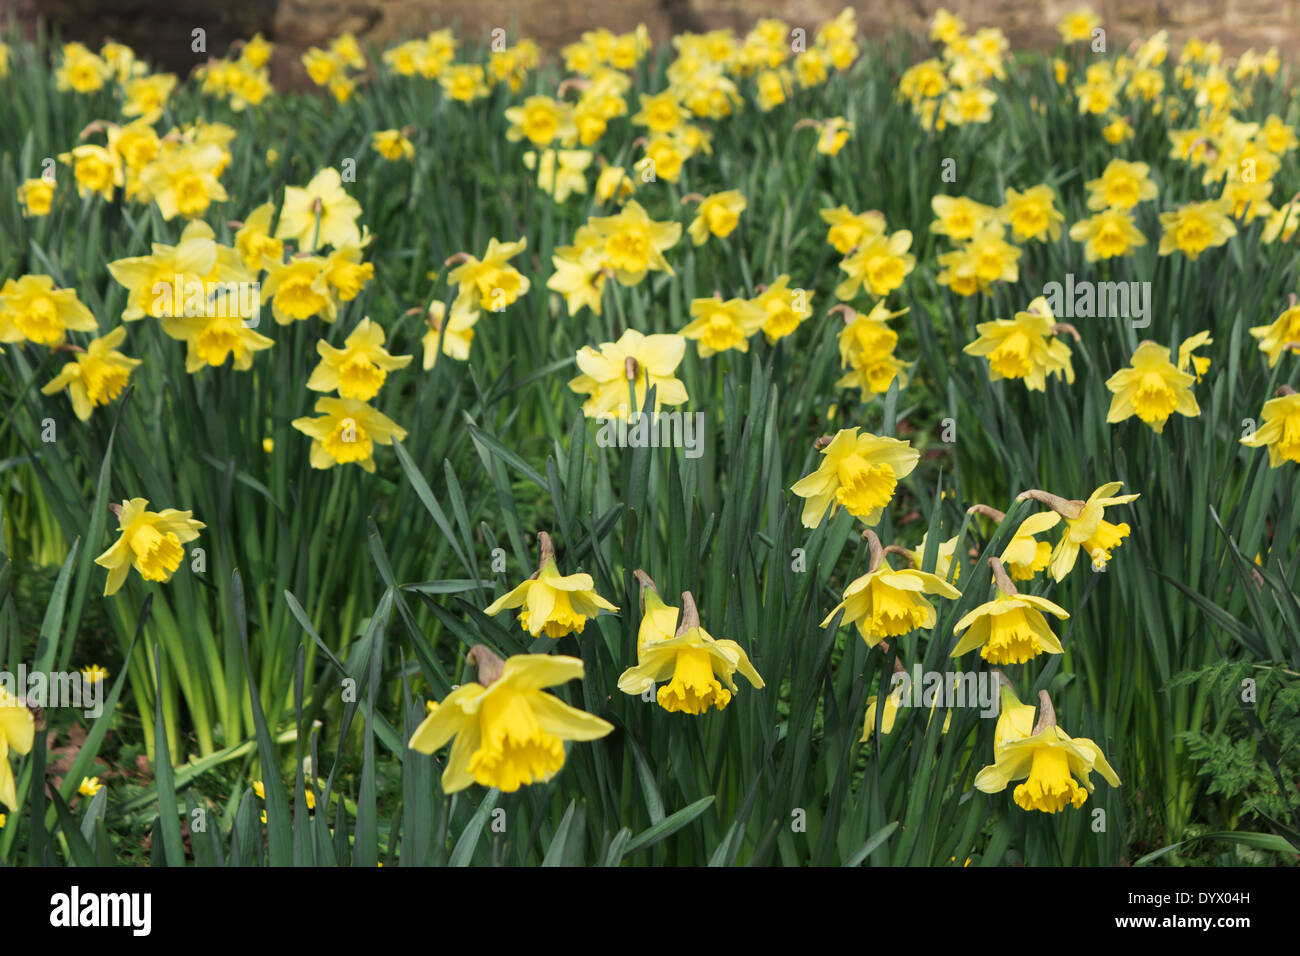 Golden daffodils in spring. Stock Photo